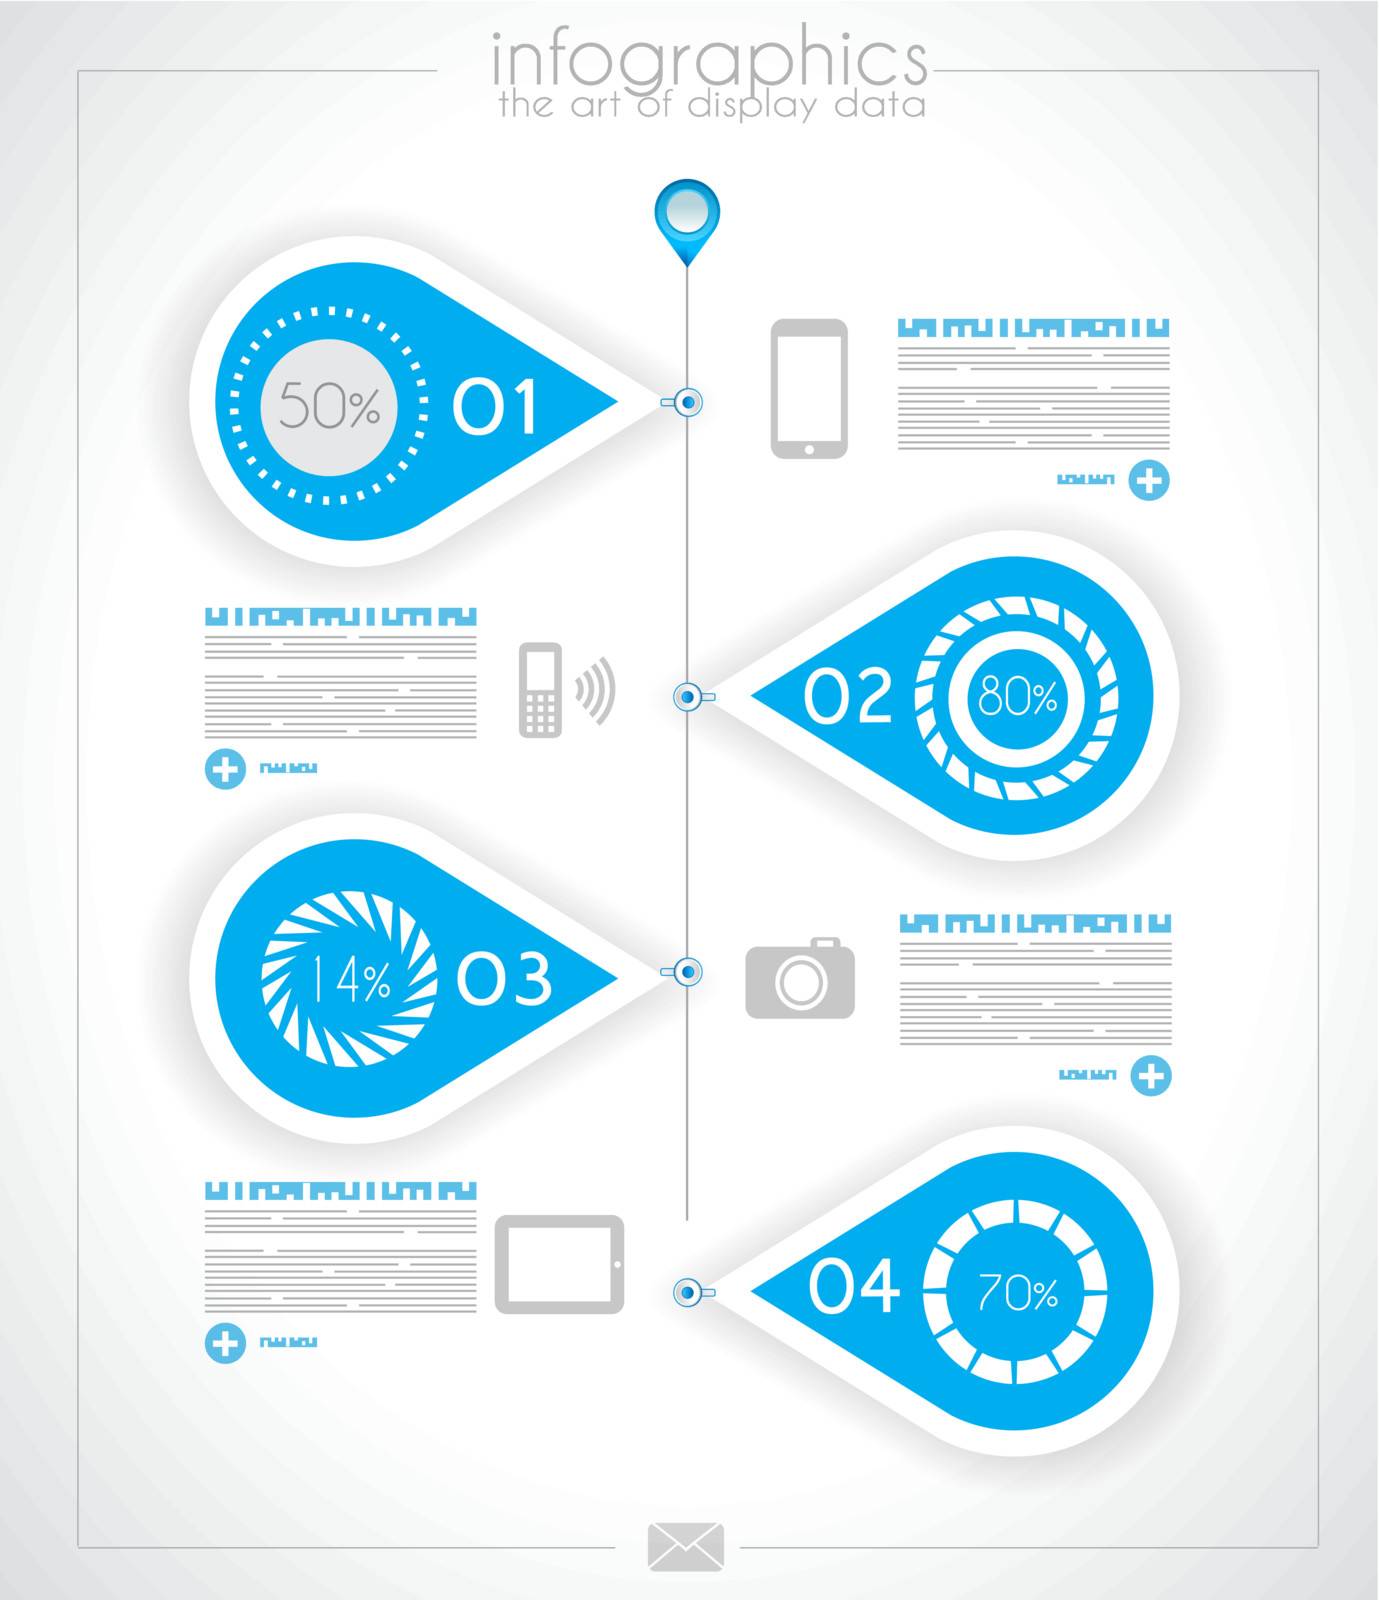 Infographic design for product ranking by DavidArts